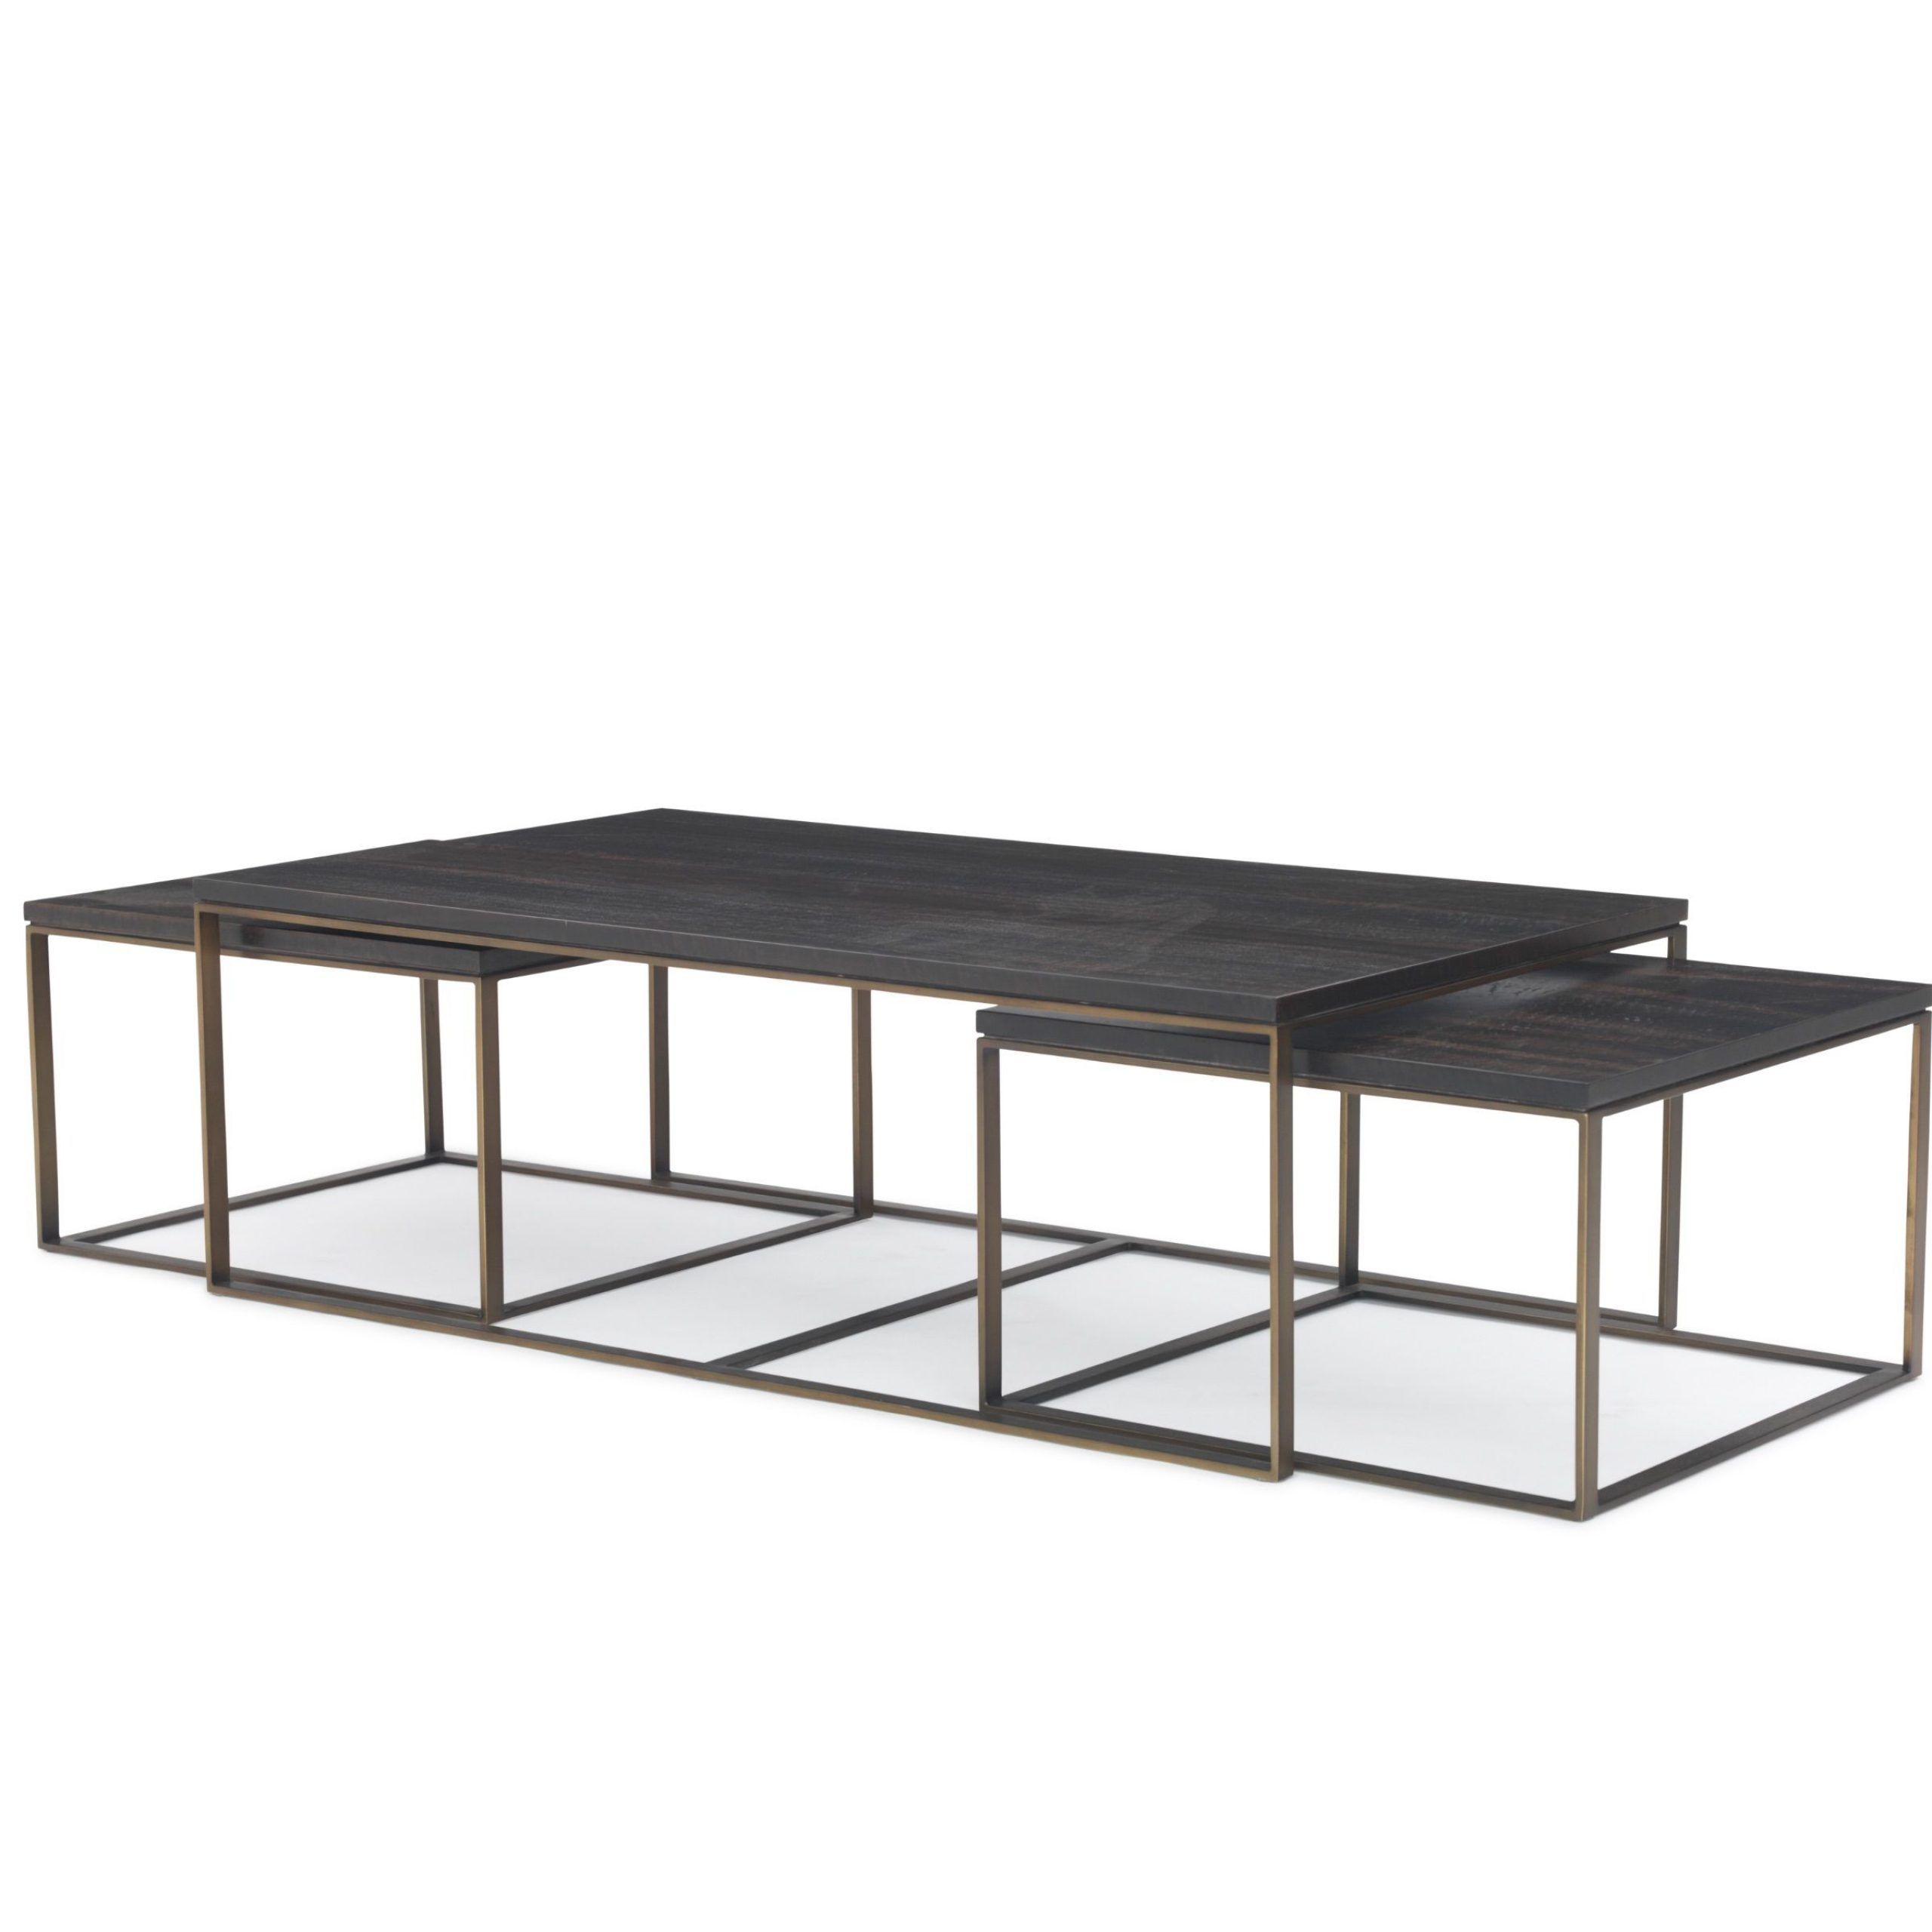 Nesting Cocktail Tables Within 2019 Allure Nesting Cocktail Tables Mgbw (View 16 of 20)